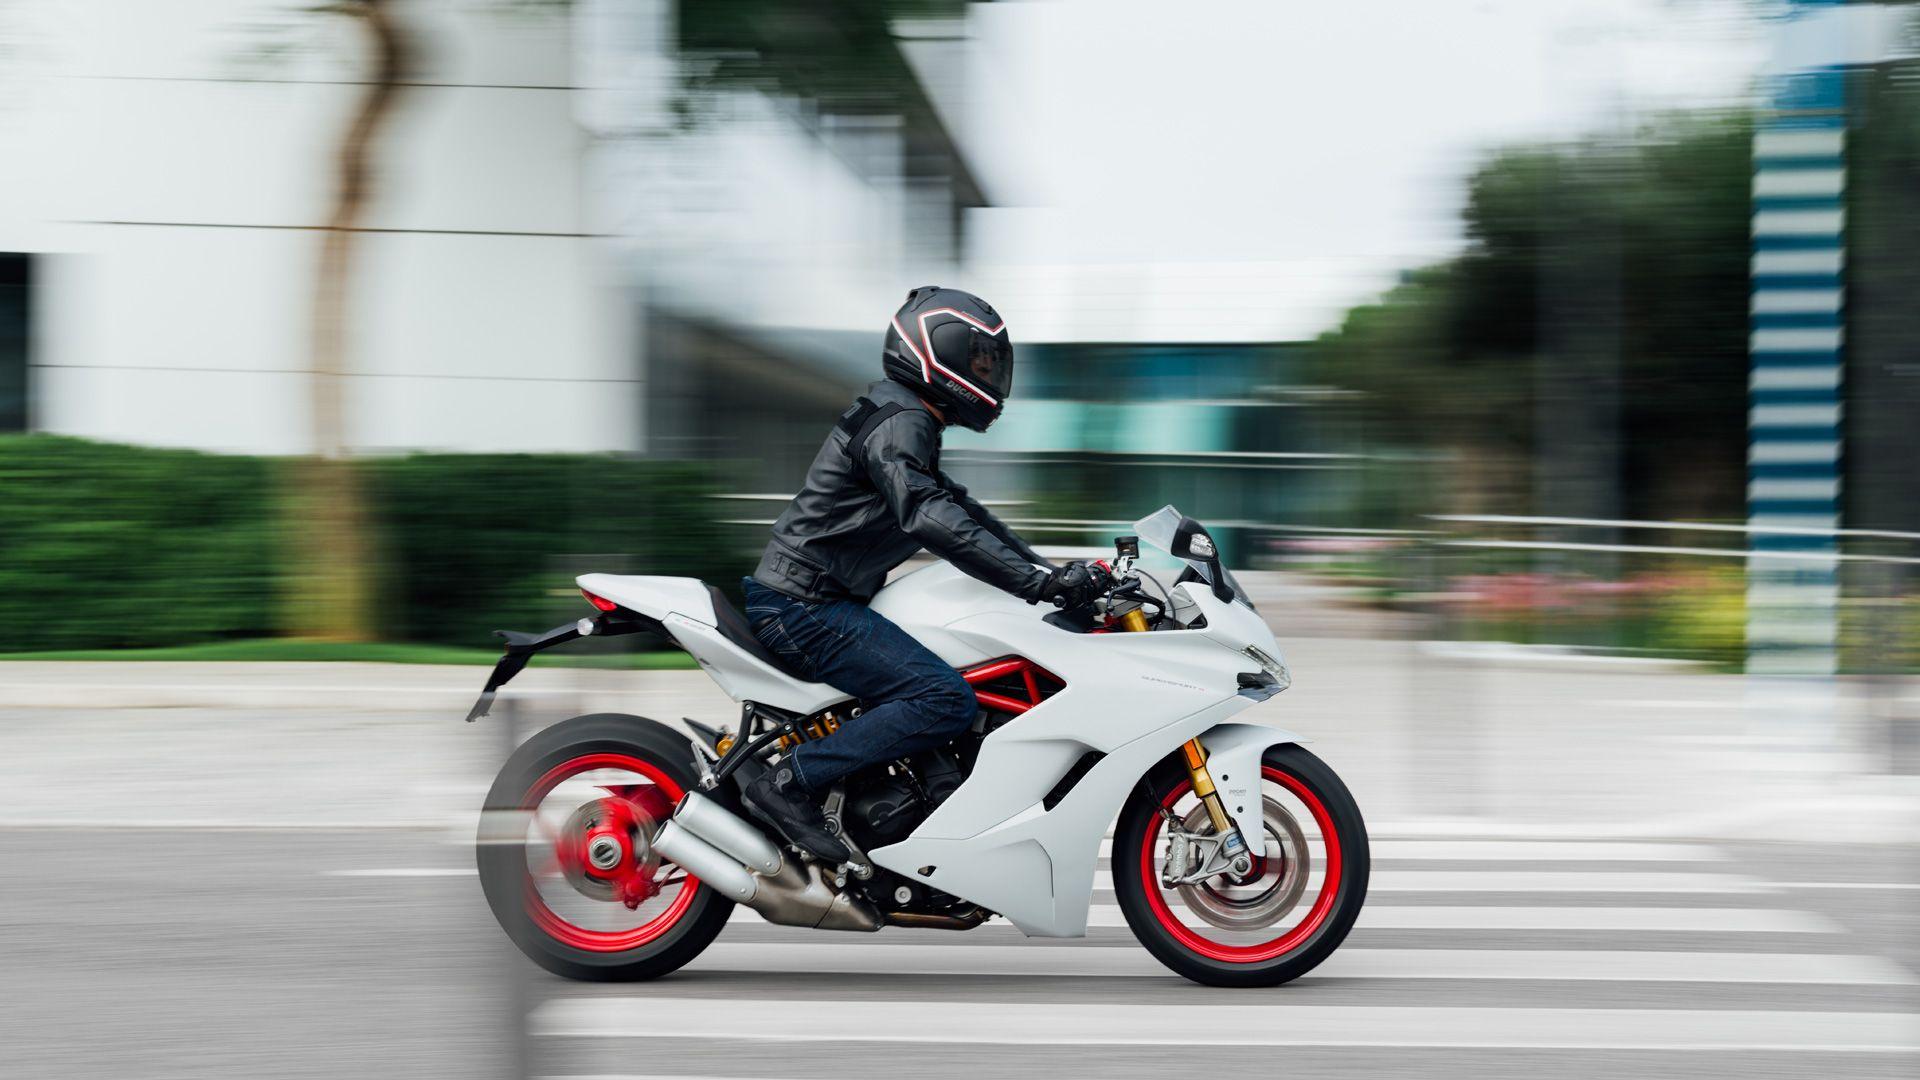 Ducati SuperSport: the energy of sport wherever it goes